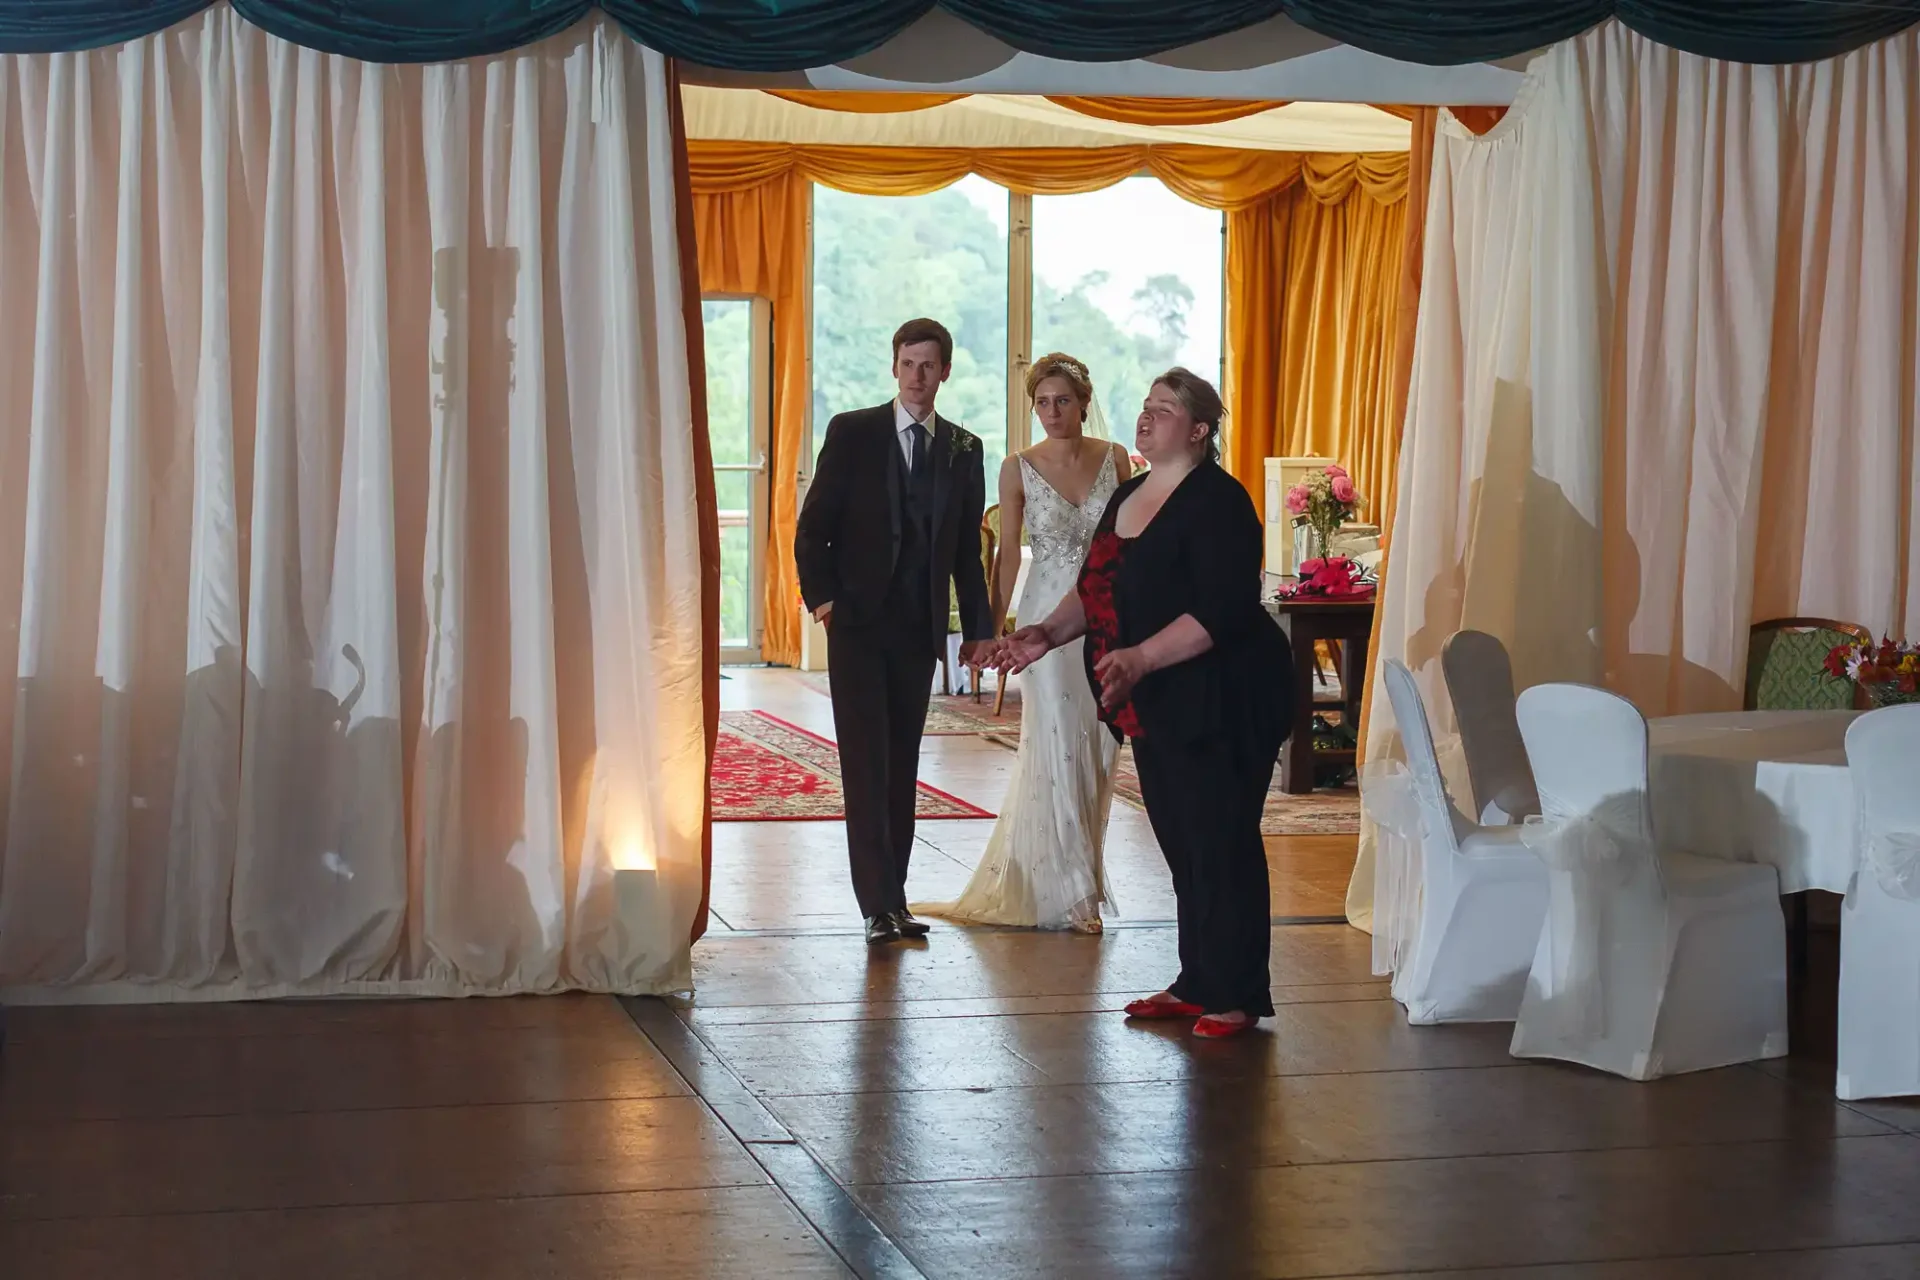 A bride and groom being escorted into a wedding reception by a woman in a black and red dress, with white chairs and curtains in the background.